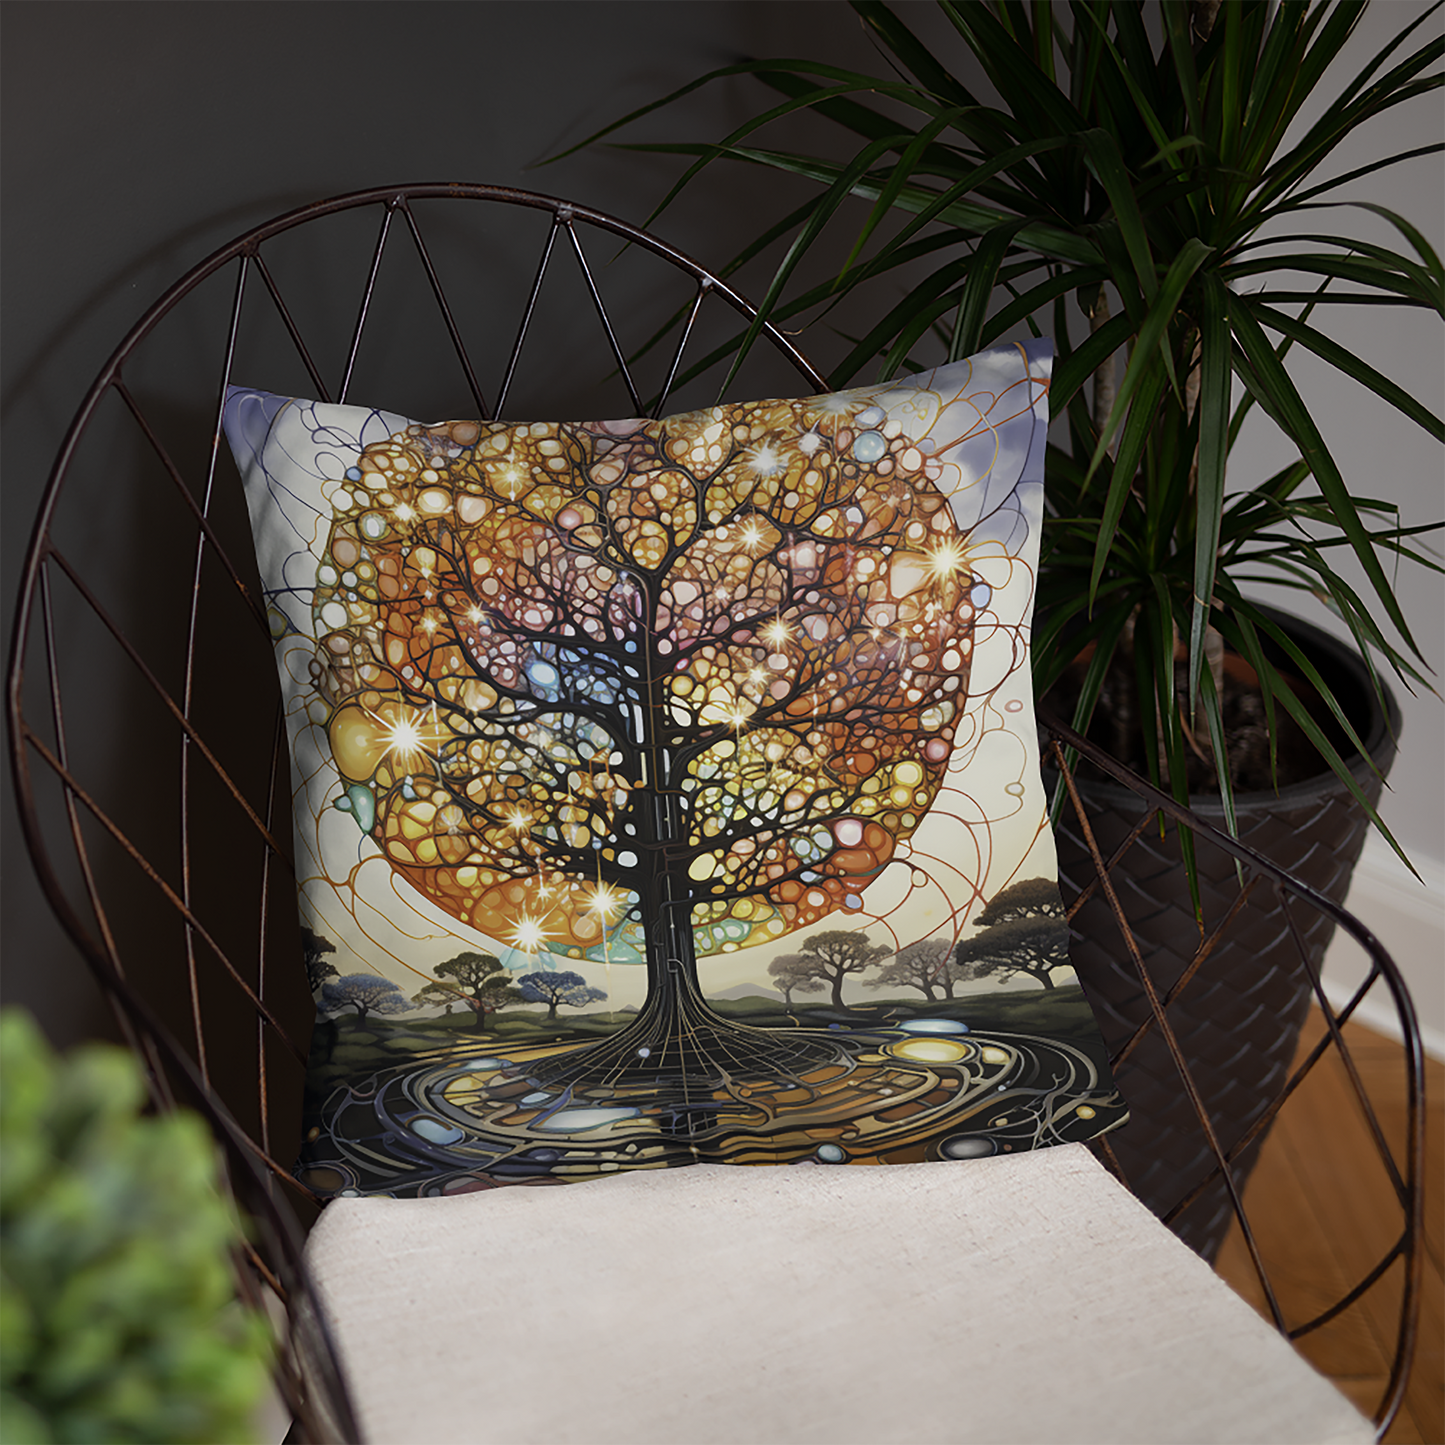 Psychedelic Throw Pillow Atomic Tree Luminist Landscape Polyester Decorative Cushion 18x18